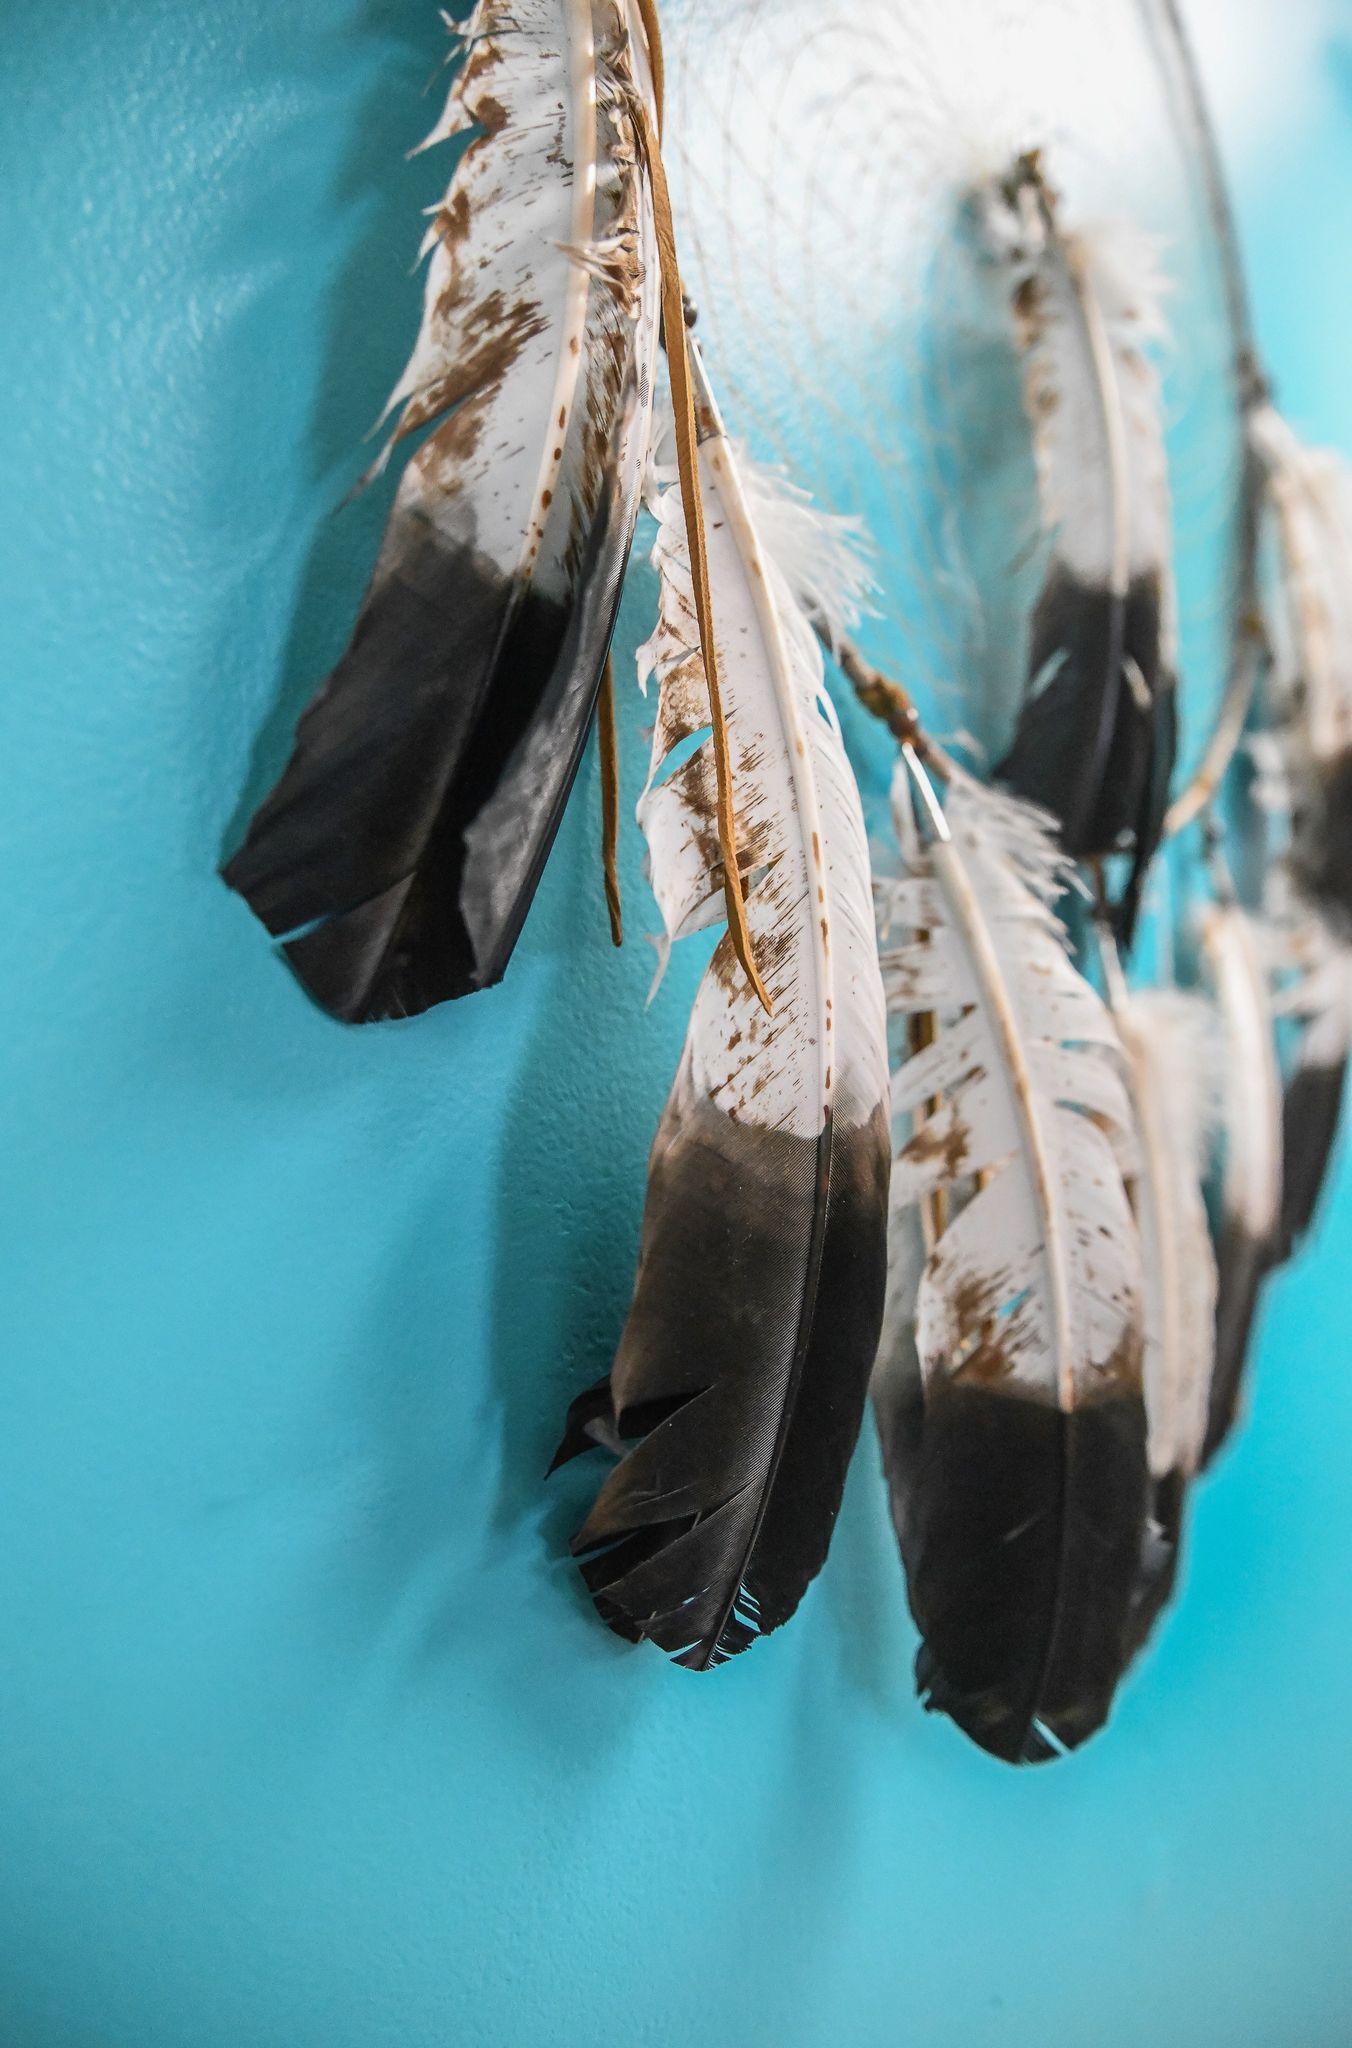 Native American Feathers